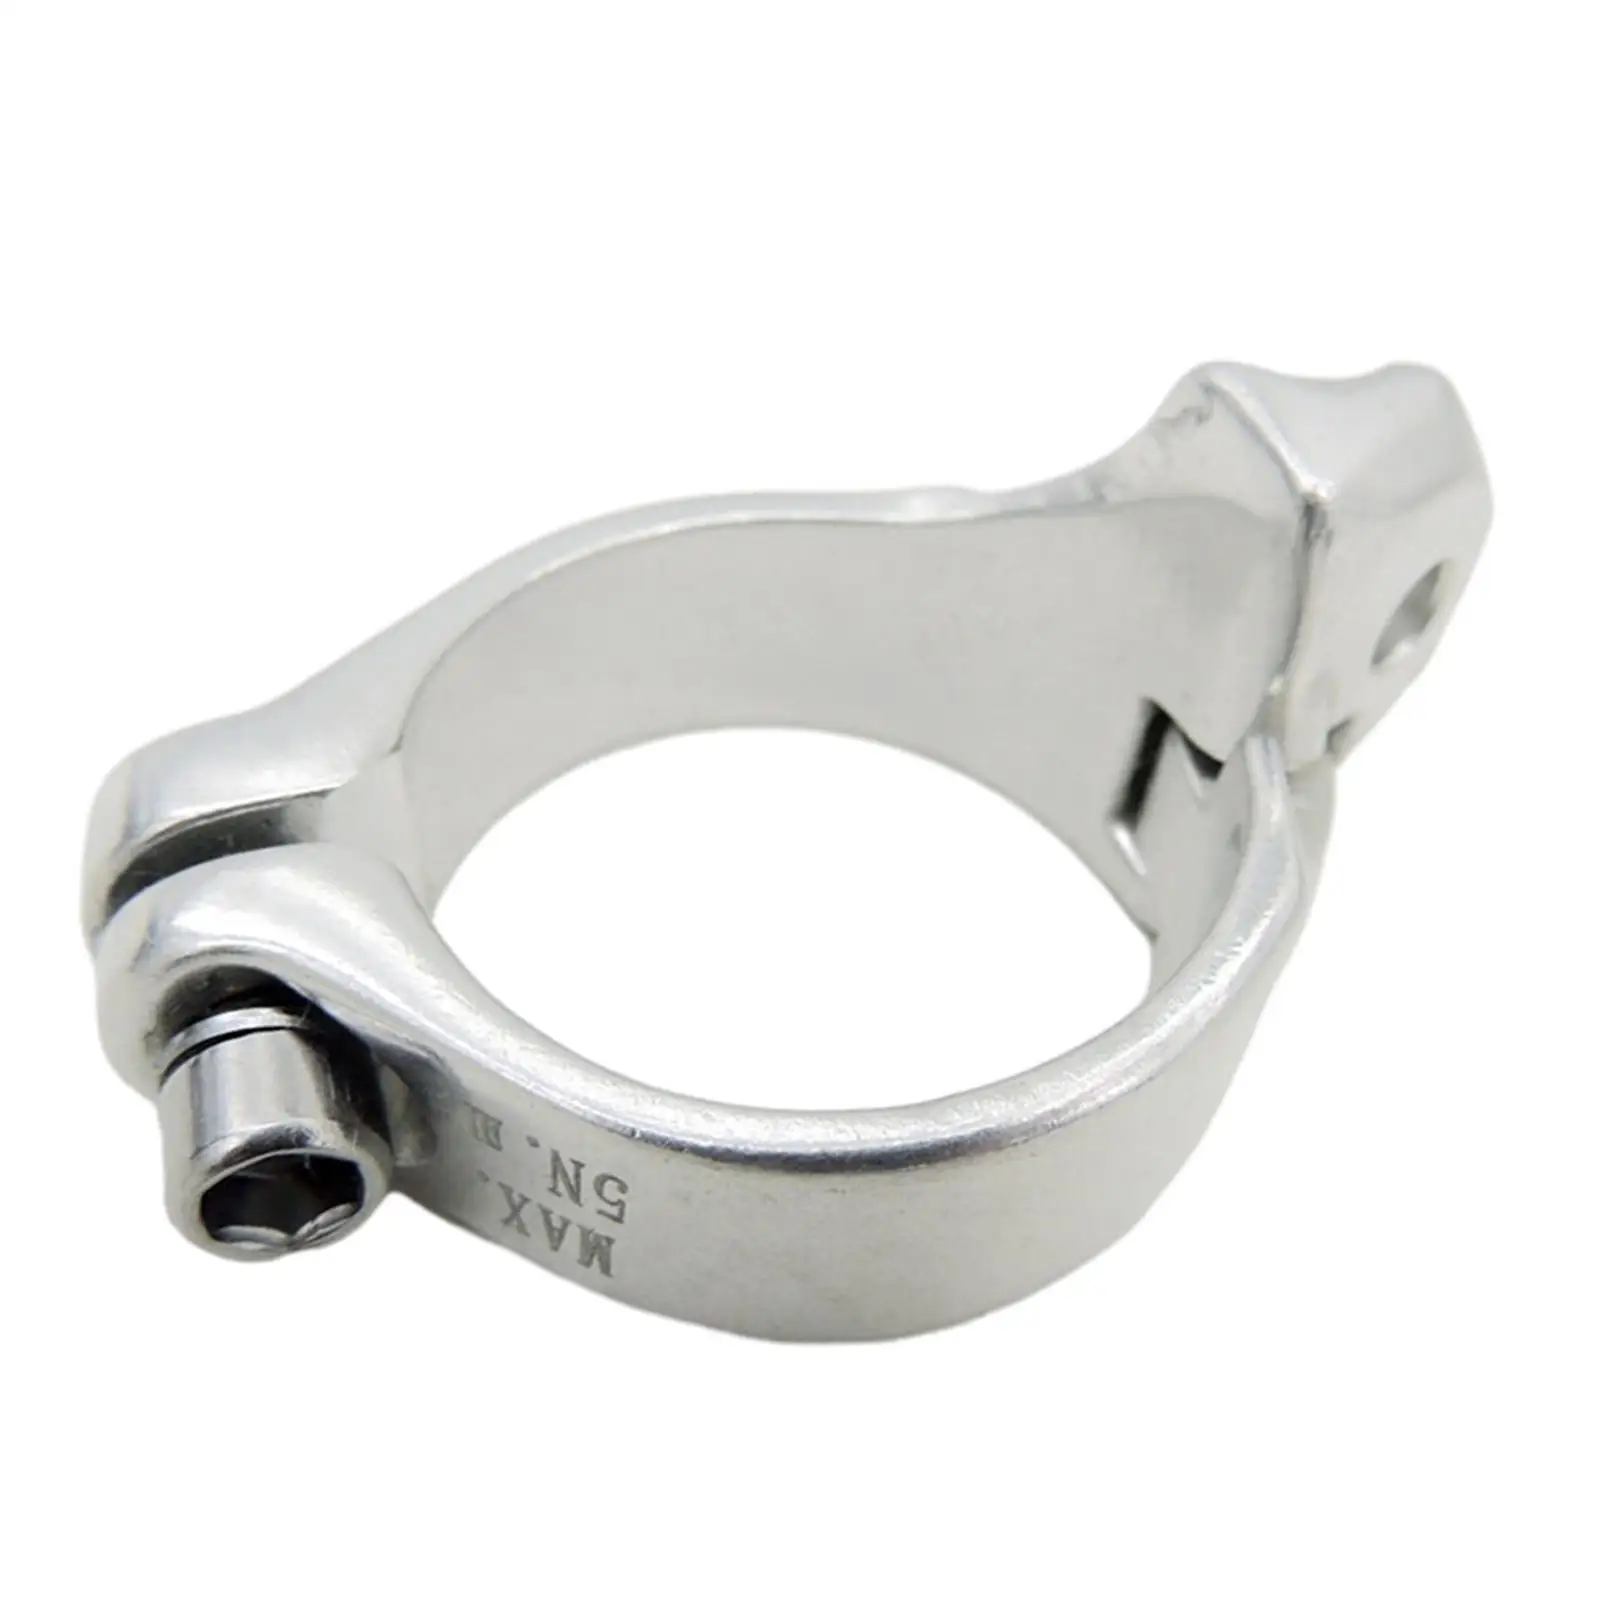 Bicycle Front Derailleur Clamp Bike Tube Clip Braze on Adapter Clamp Aluminium Alloy Bike Derailleur Clamp 34.9mm for Road Bike